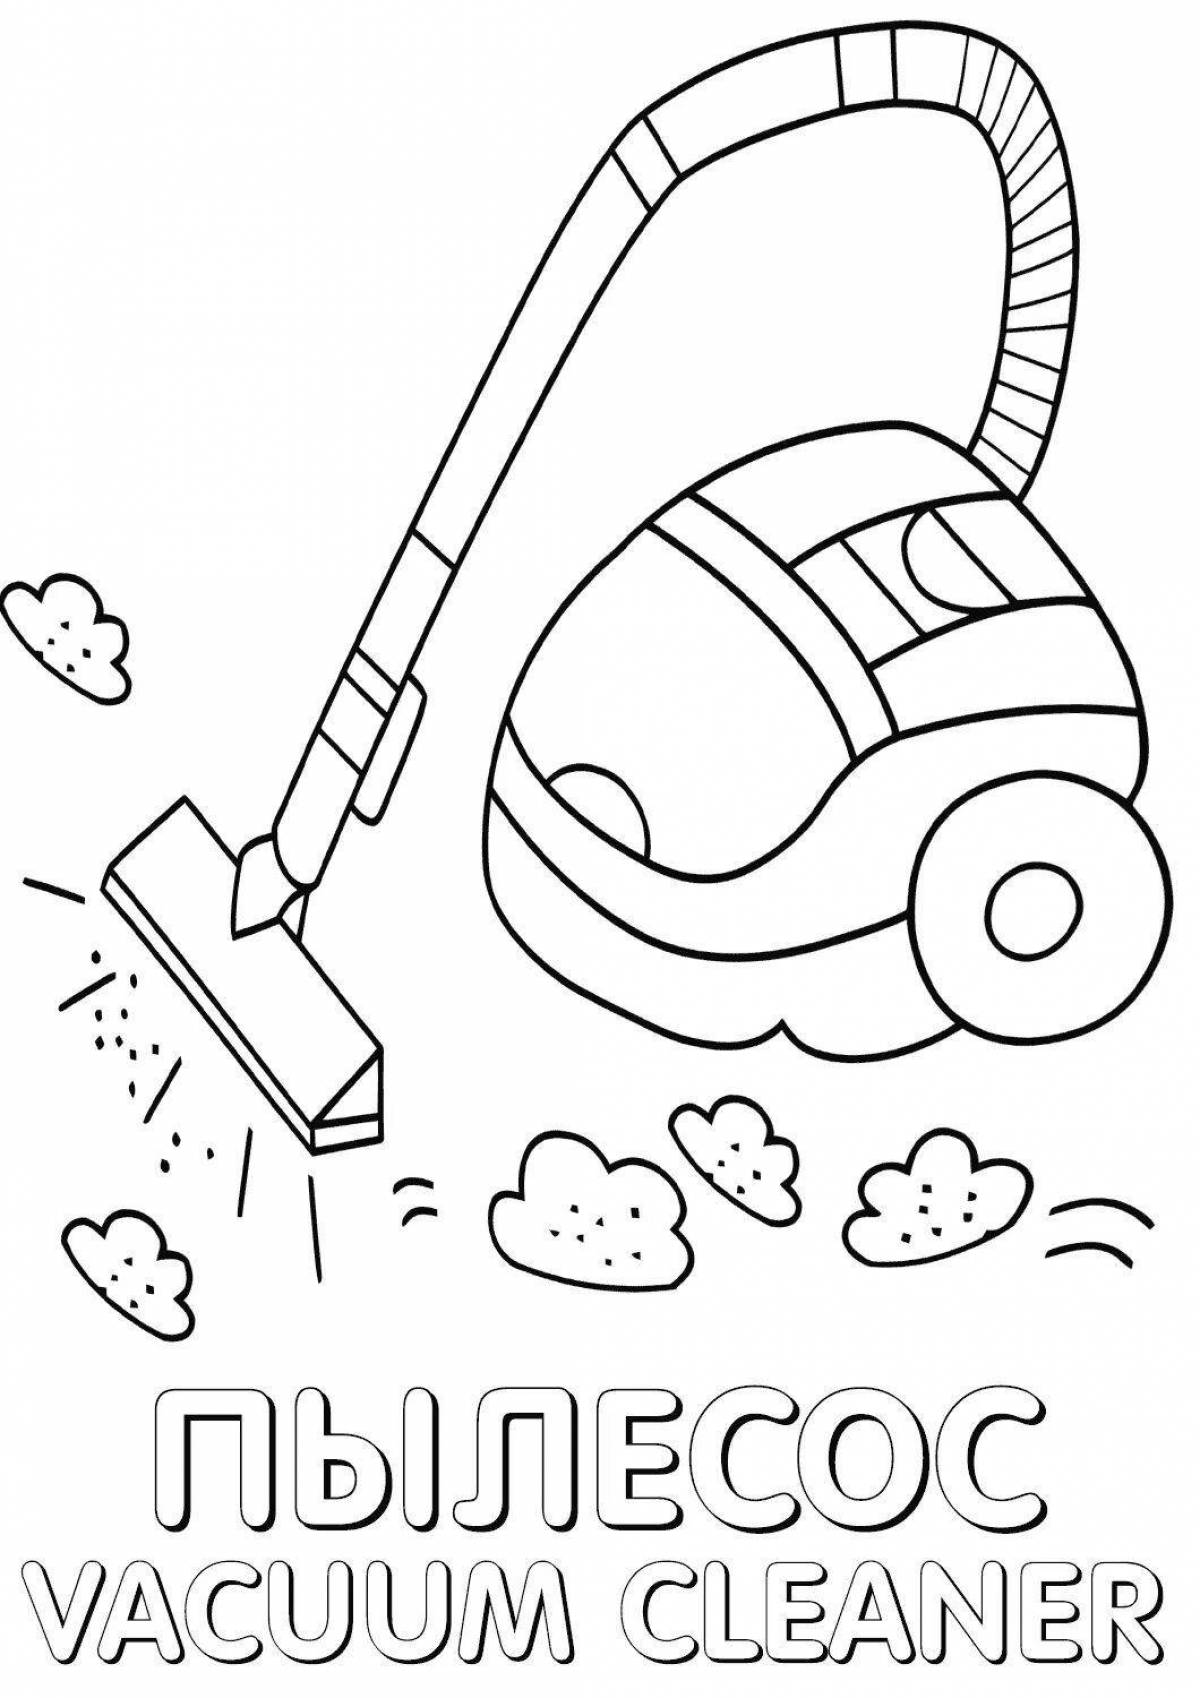 Funny coloring of the vacuum cleaner for children